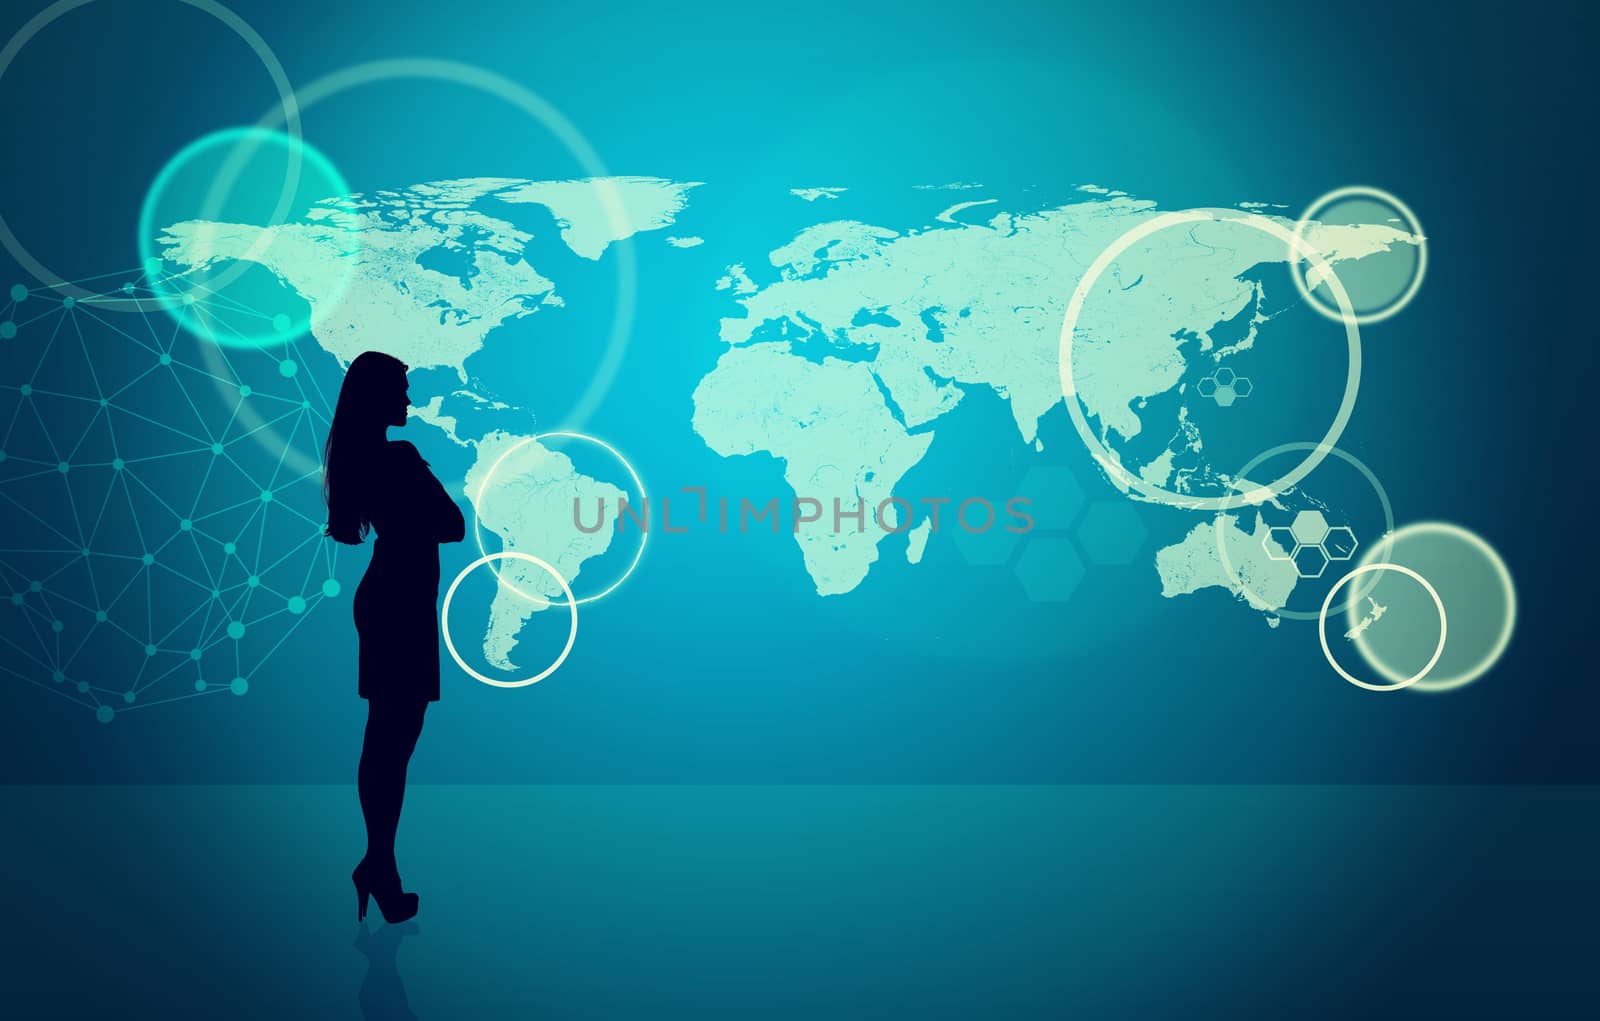 Businesswomans silhouette on abstract blue background with world map